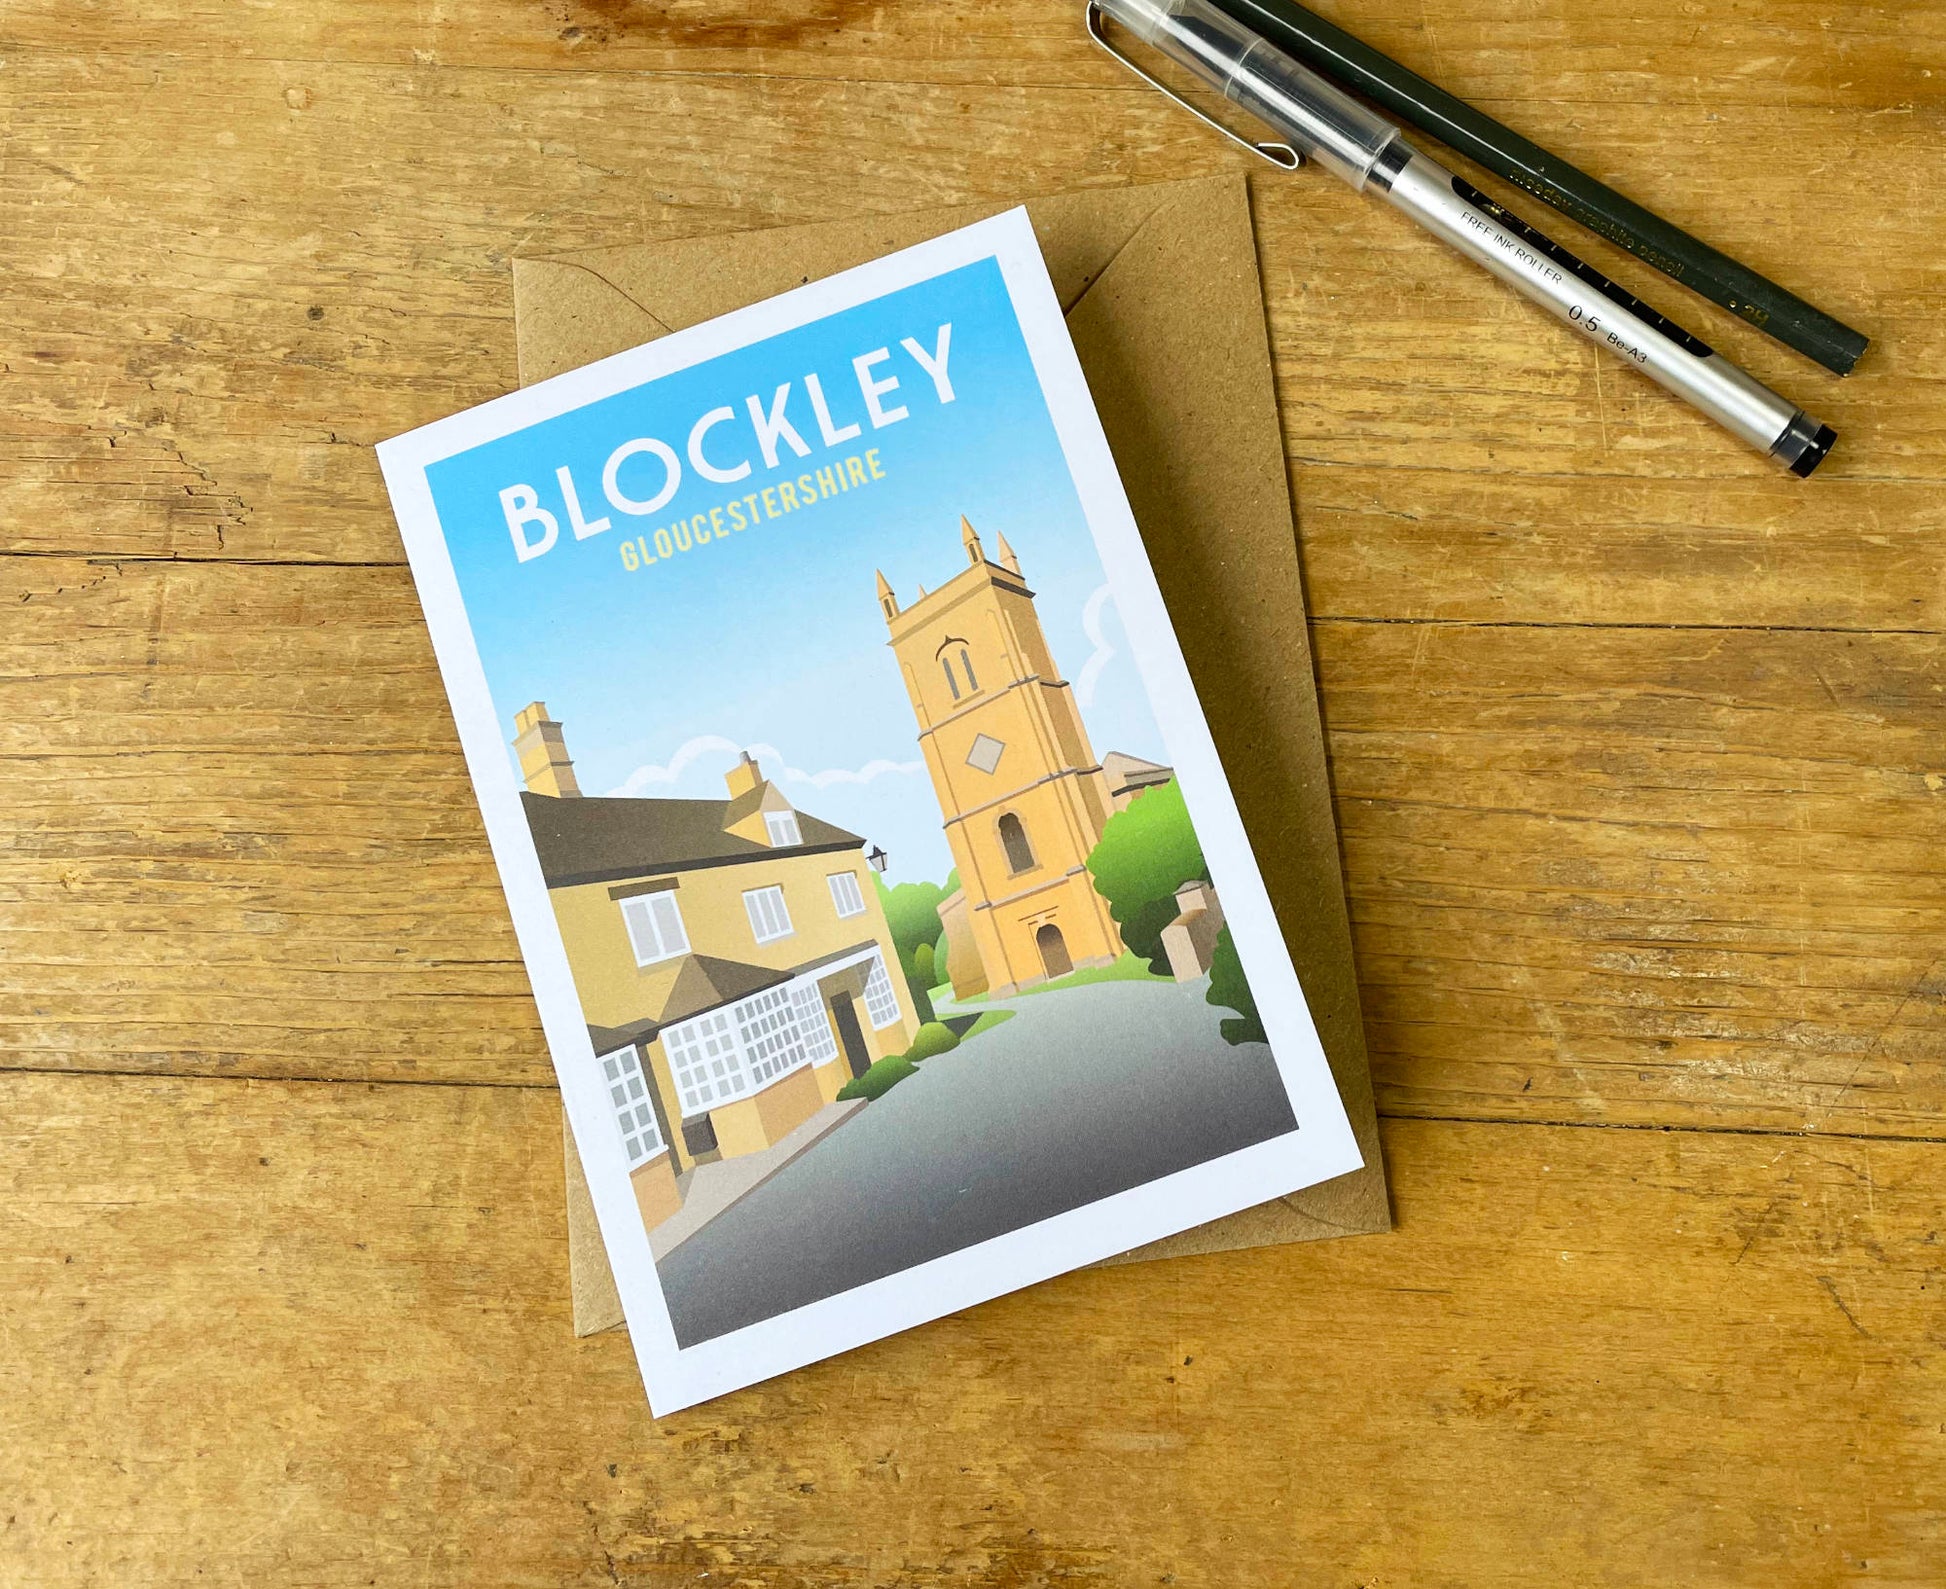 Blockley Greeting Card with pens